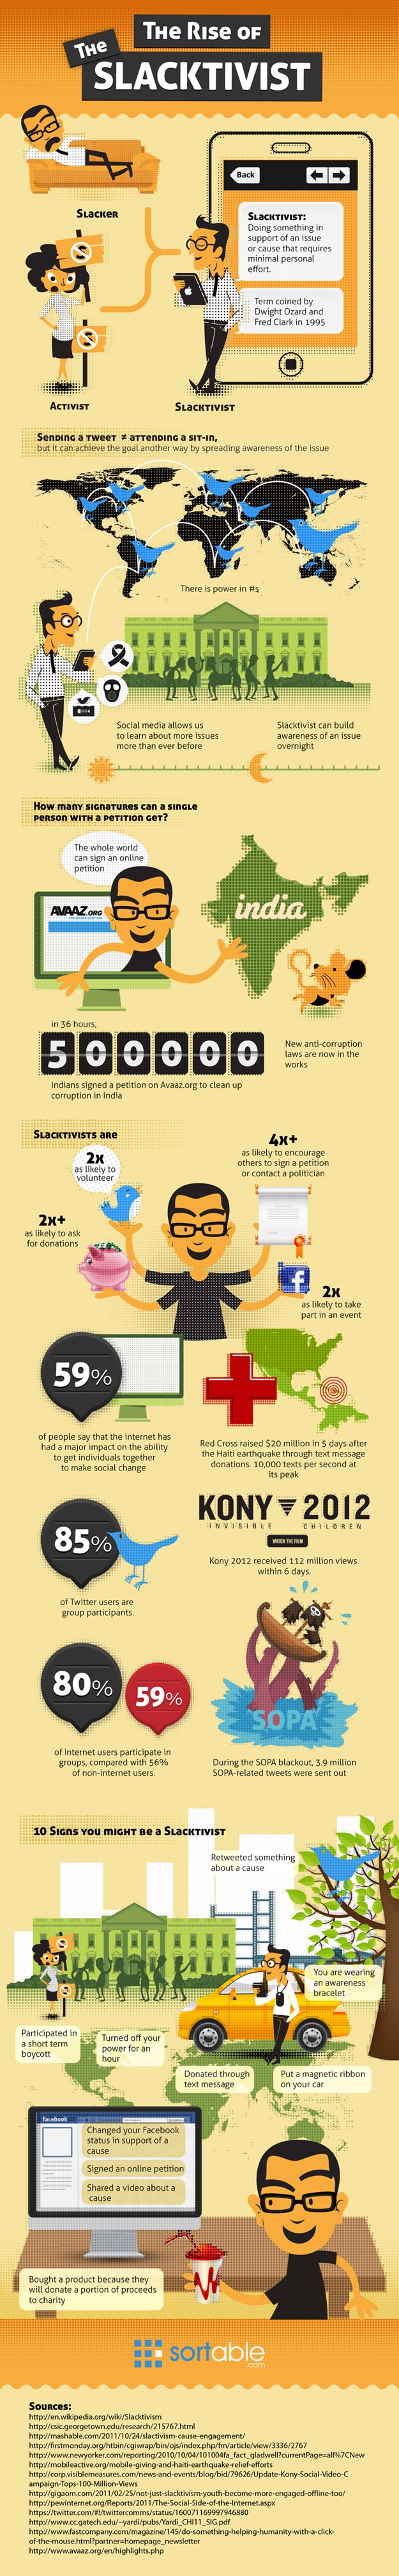 The Rise Of The Slacktivist [Infographic]